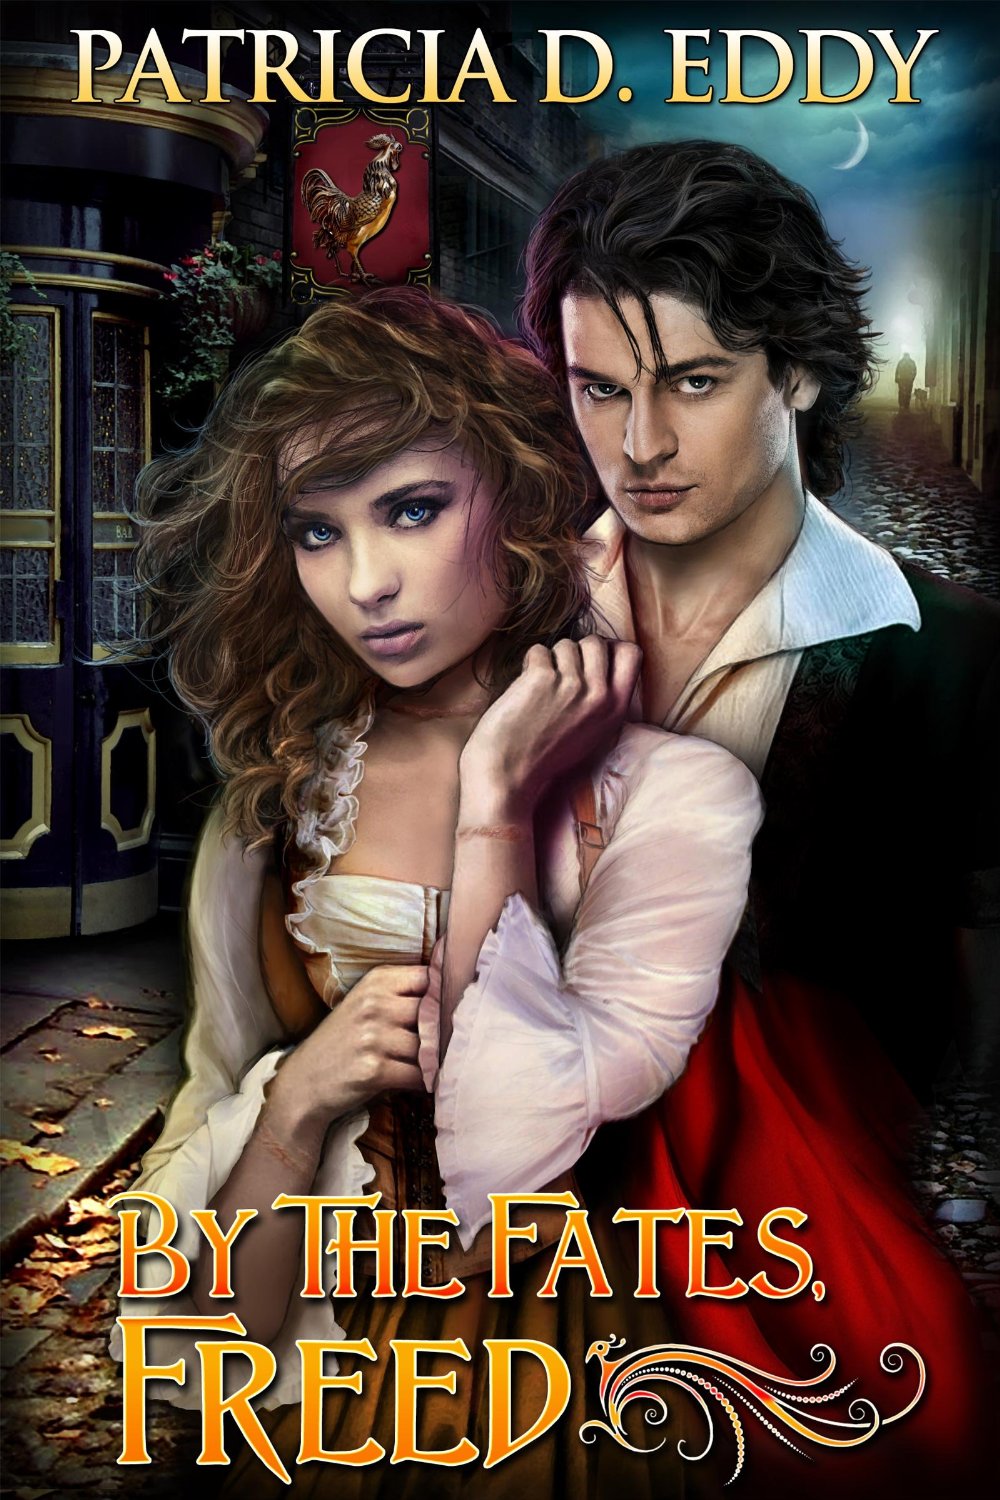 By The Fates, Freed by Patricia D. Eddy